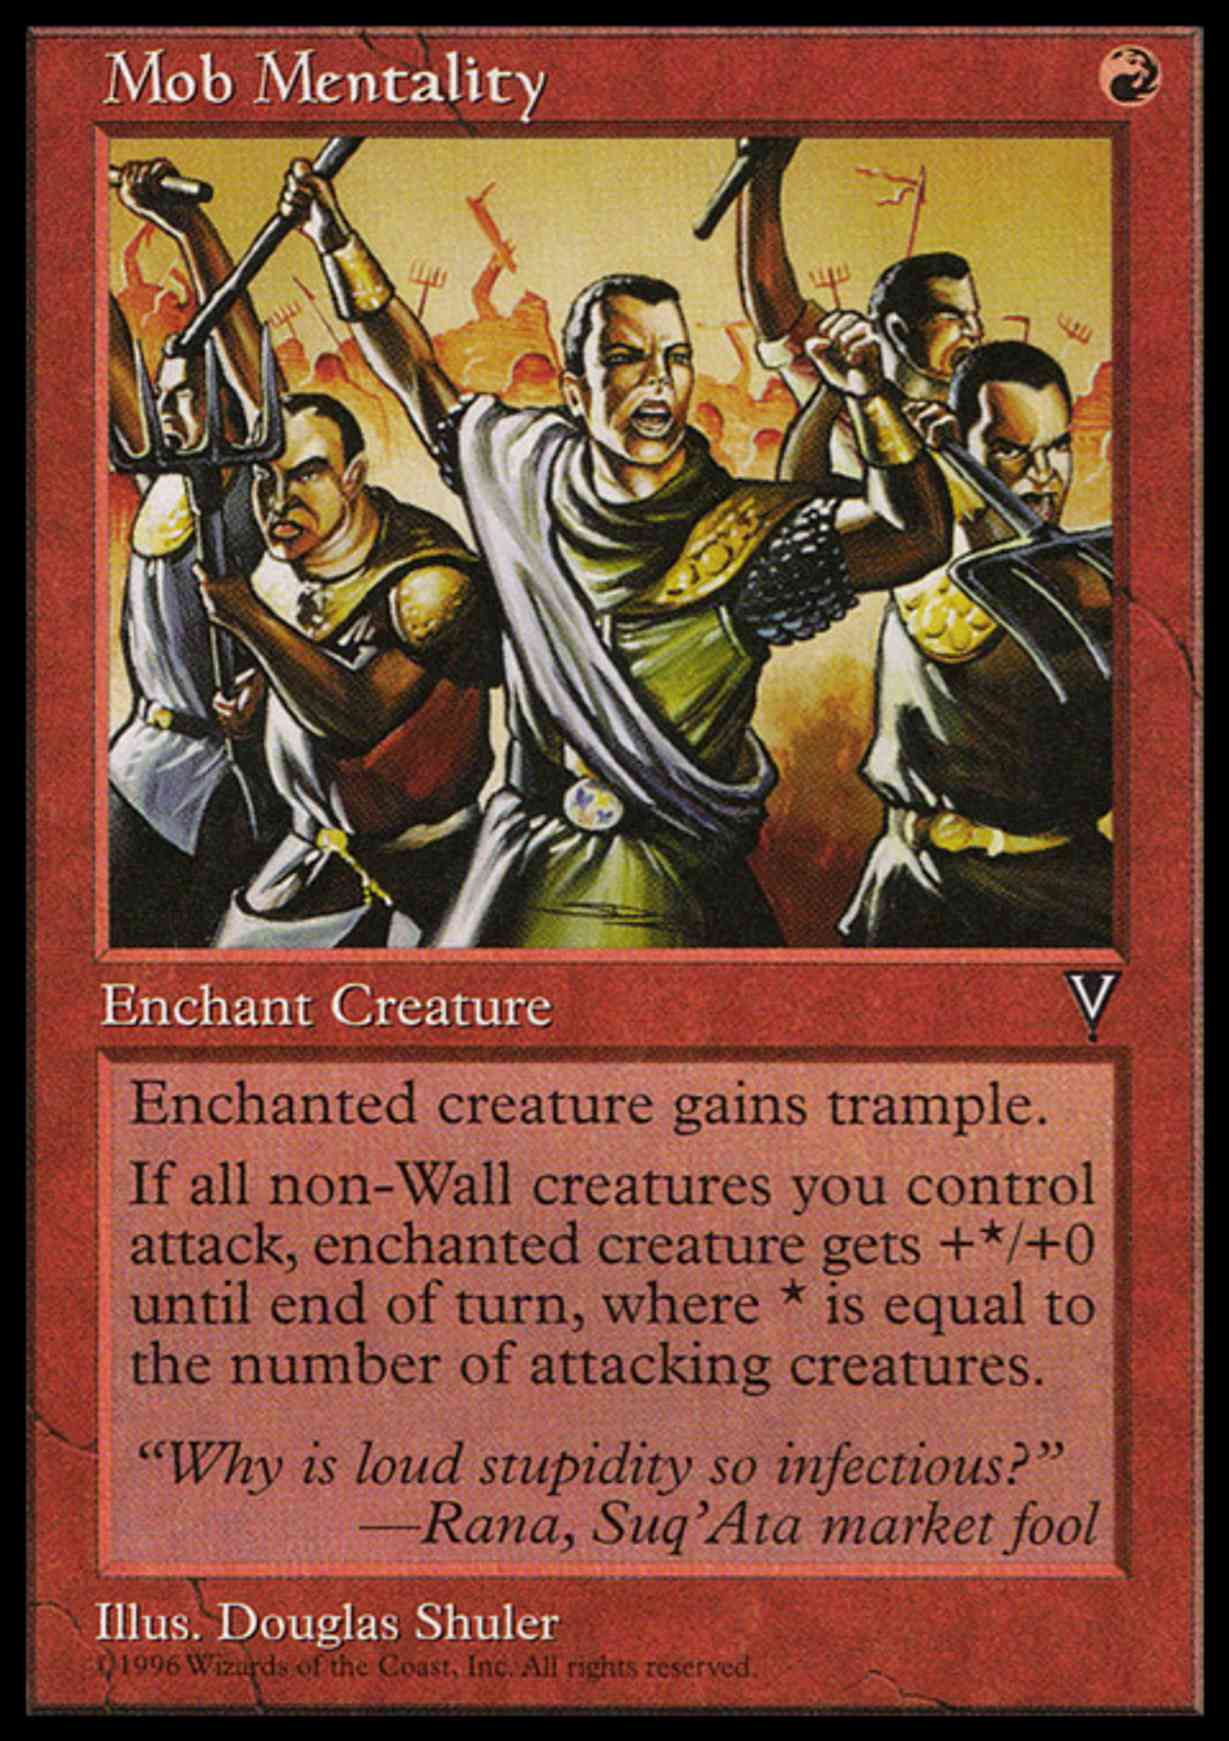 Mob Mentality magic card front